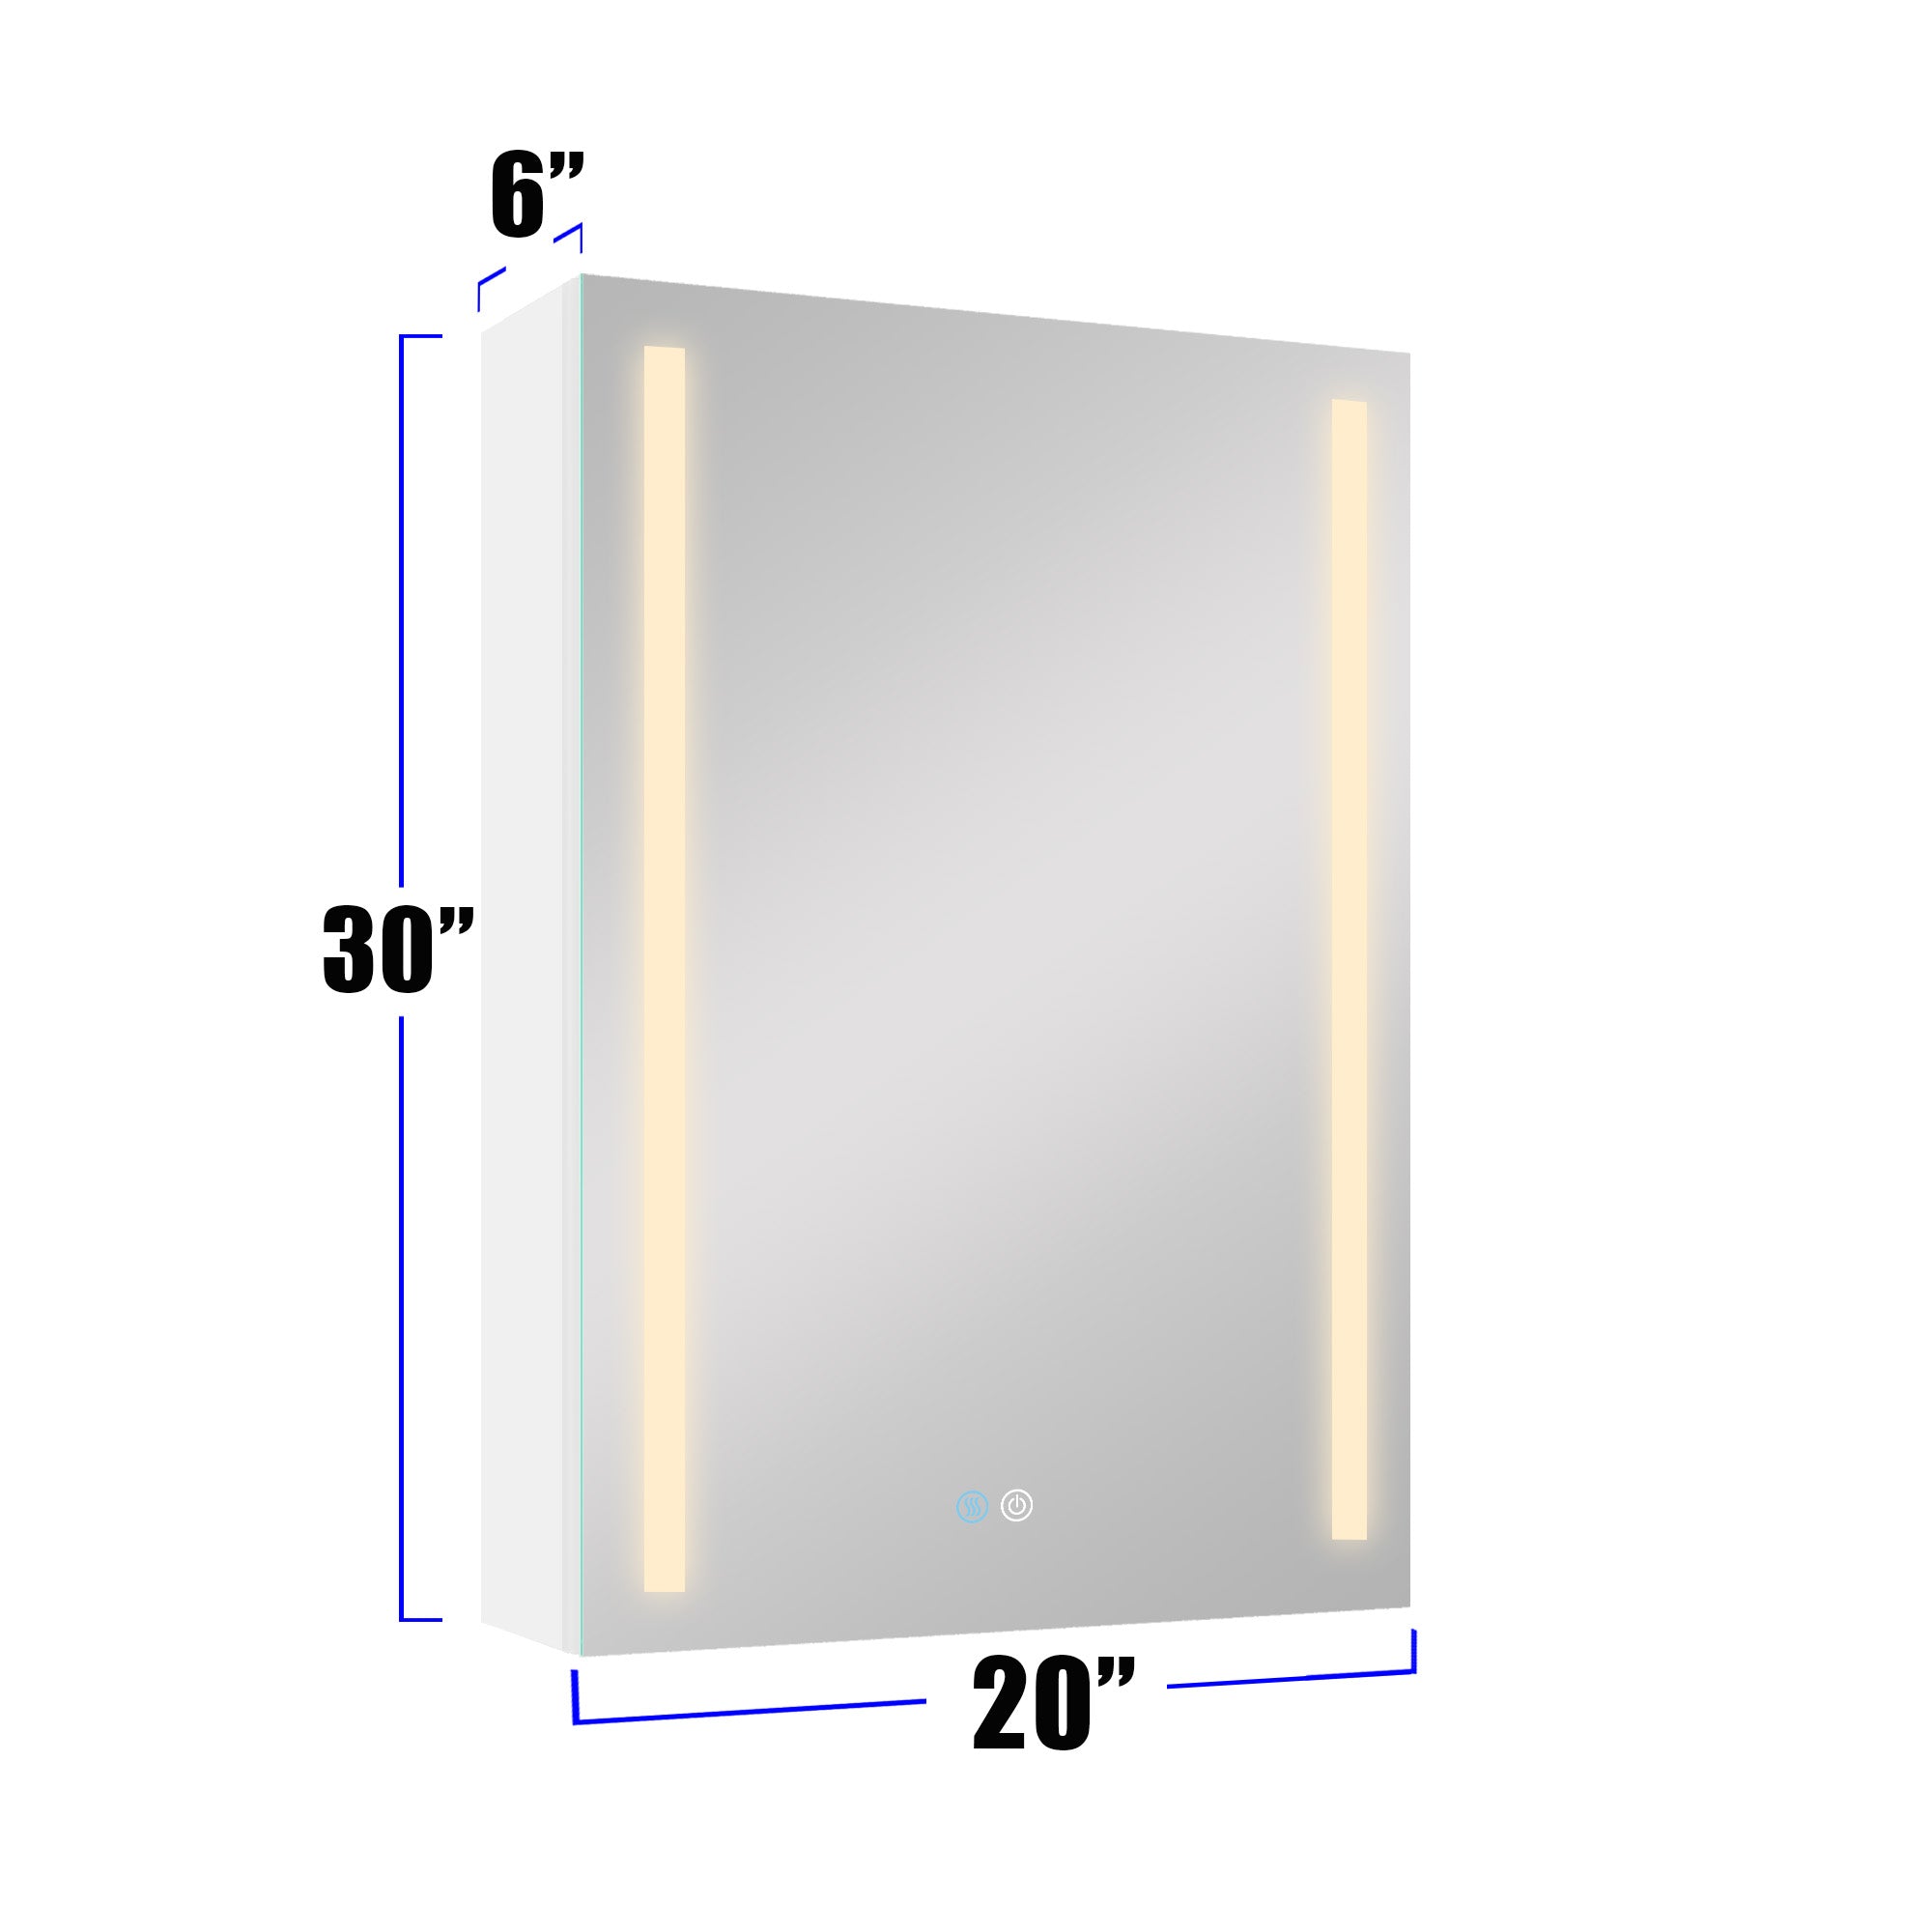 ZNTS 30x20 inch LED Bathroom Medicine Cabinet Surface Mounted Cabinets With Lighted Mirror White Left W995104170